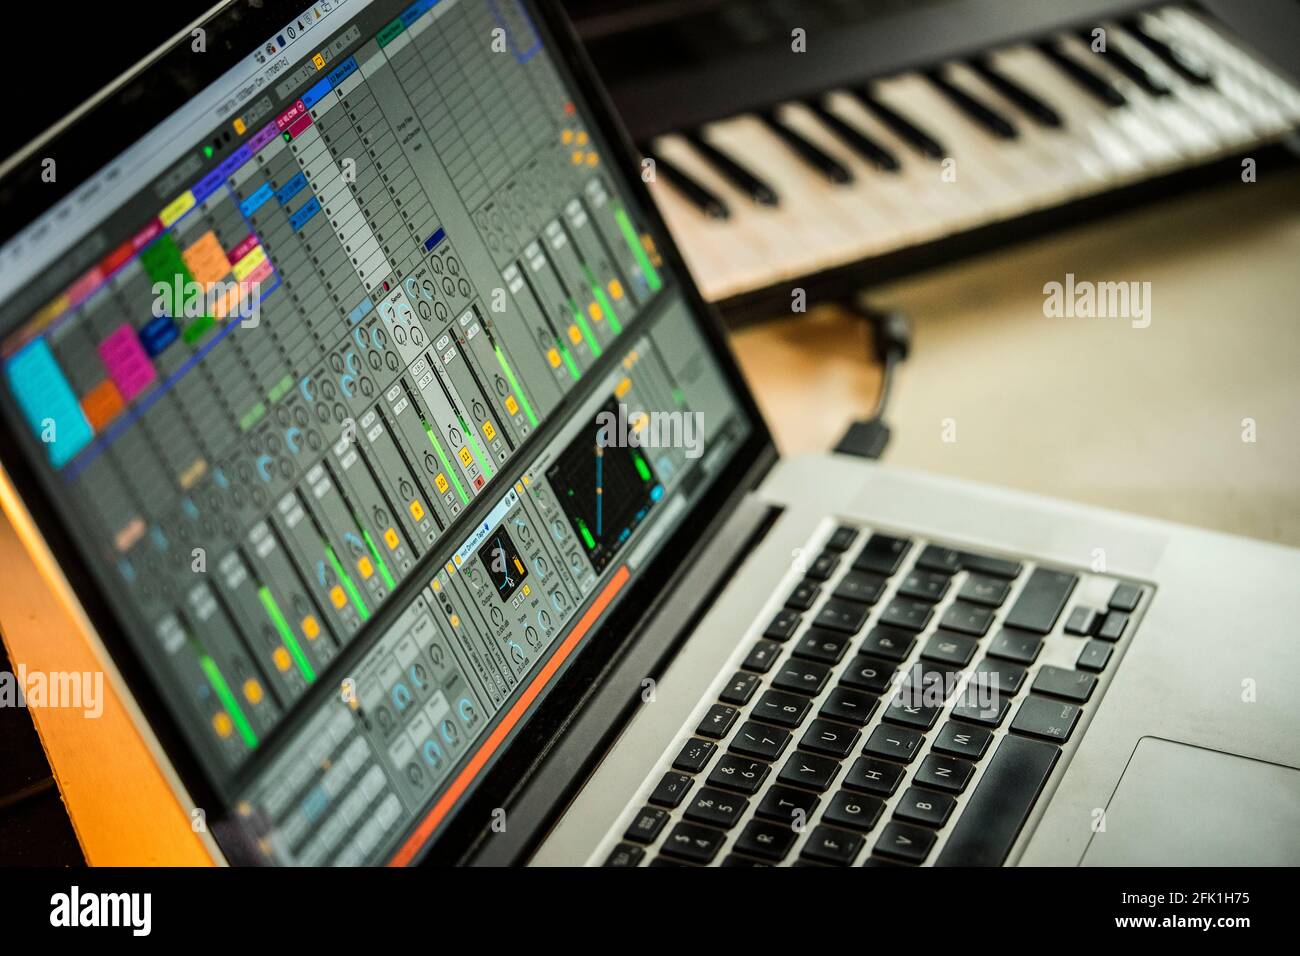 Ableton Live music production software on a macbook pro with synth in background. Stock Photo